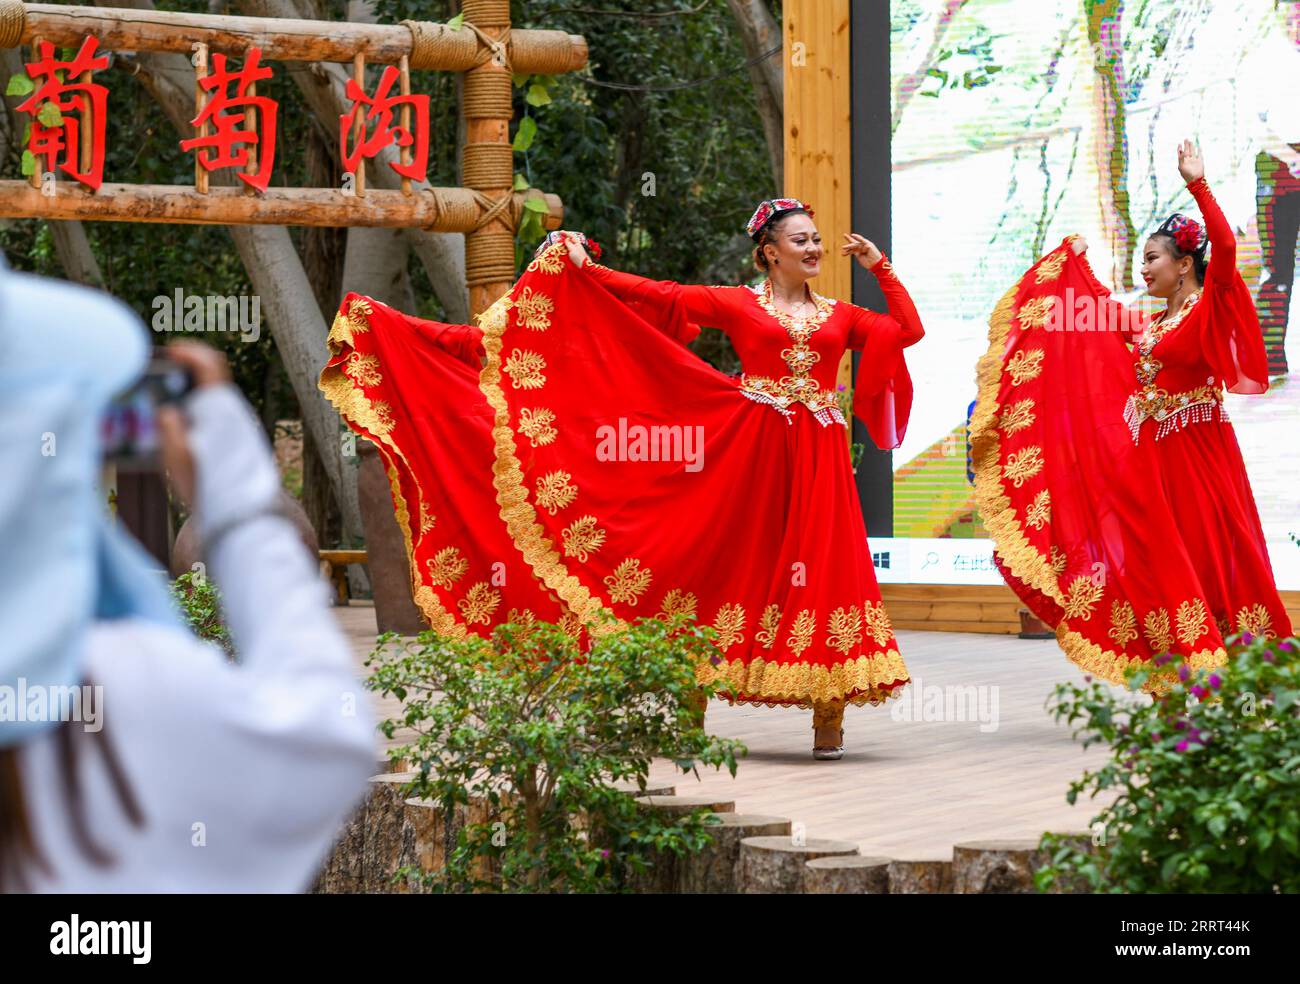 230628 -- URUMQI, June 28, 2023 -- A performance is staged at the Grape Valley scenic area in Turpan, northwest China s Xinjiang Uygur Autonomous Region, June 26, 2023. The city of Turpan has received 2.53 million tourist visits from June 1 to 28, an increase of nearly 40 percent over the same period in 2022.  CHINA-XINJIANG-TURPAN-TOURISM CN WangxFei PUBLICATIONxNOTxINxCHN Stock Photo